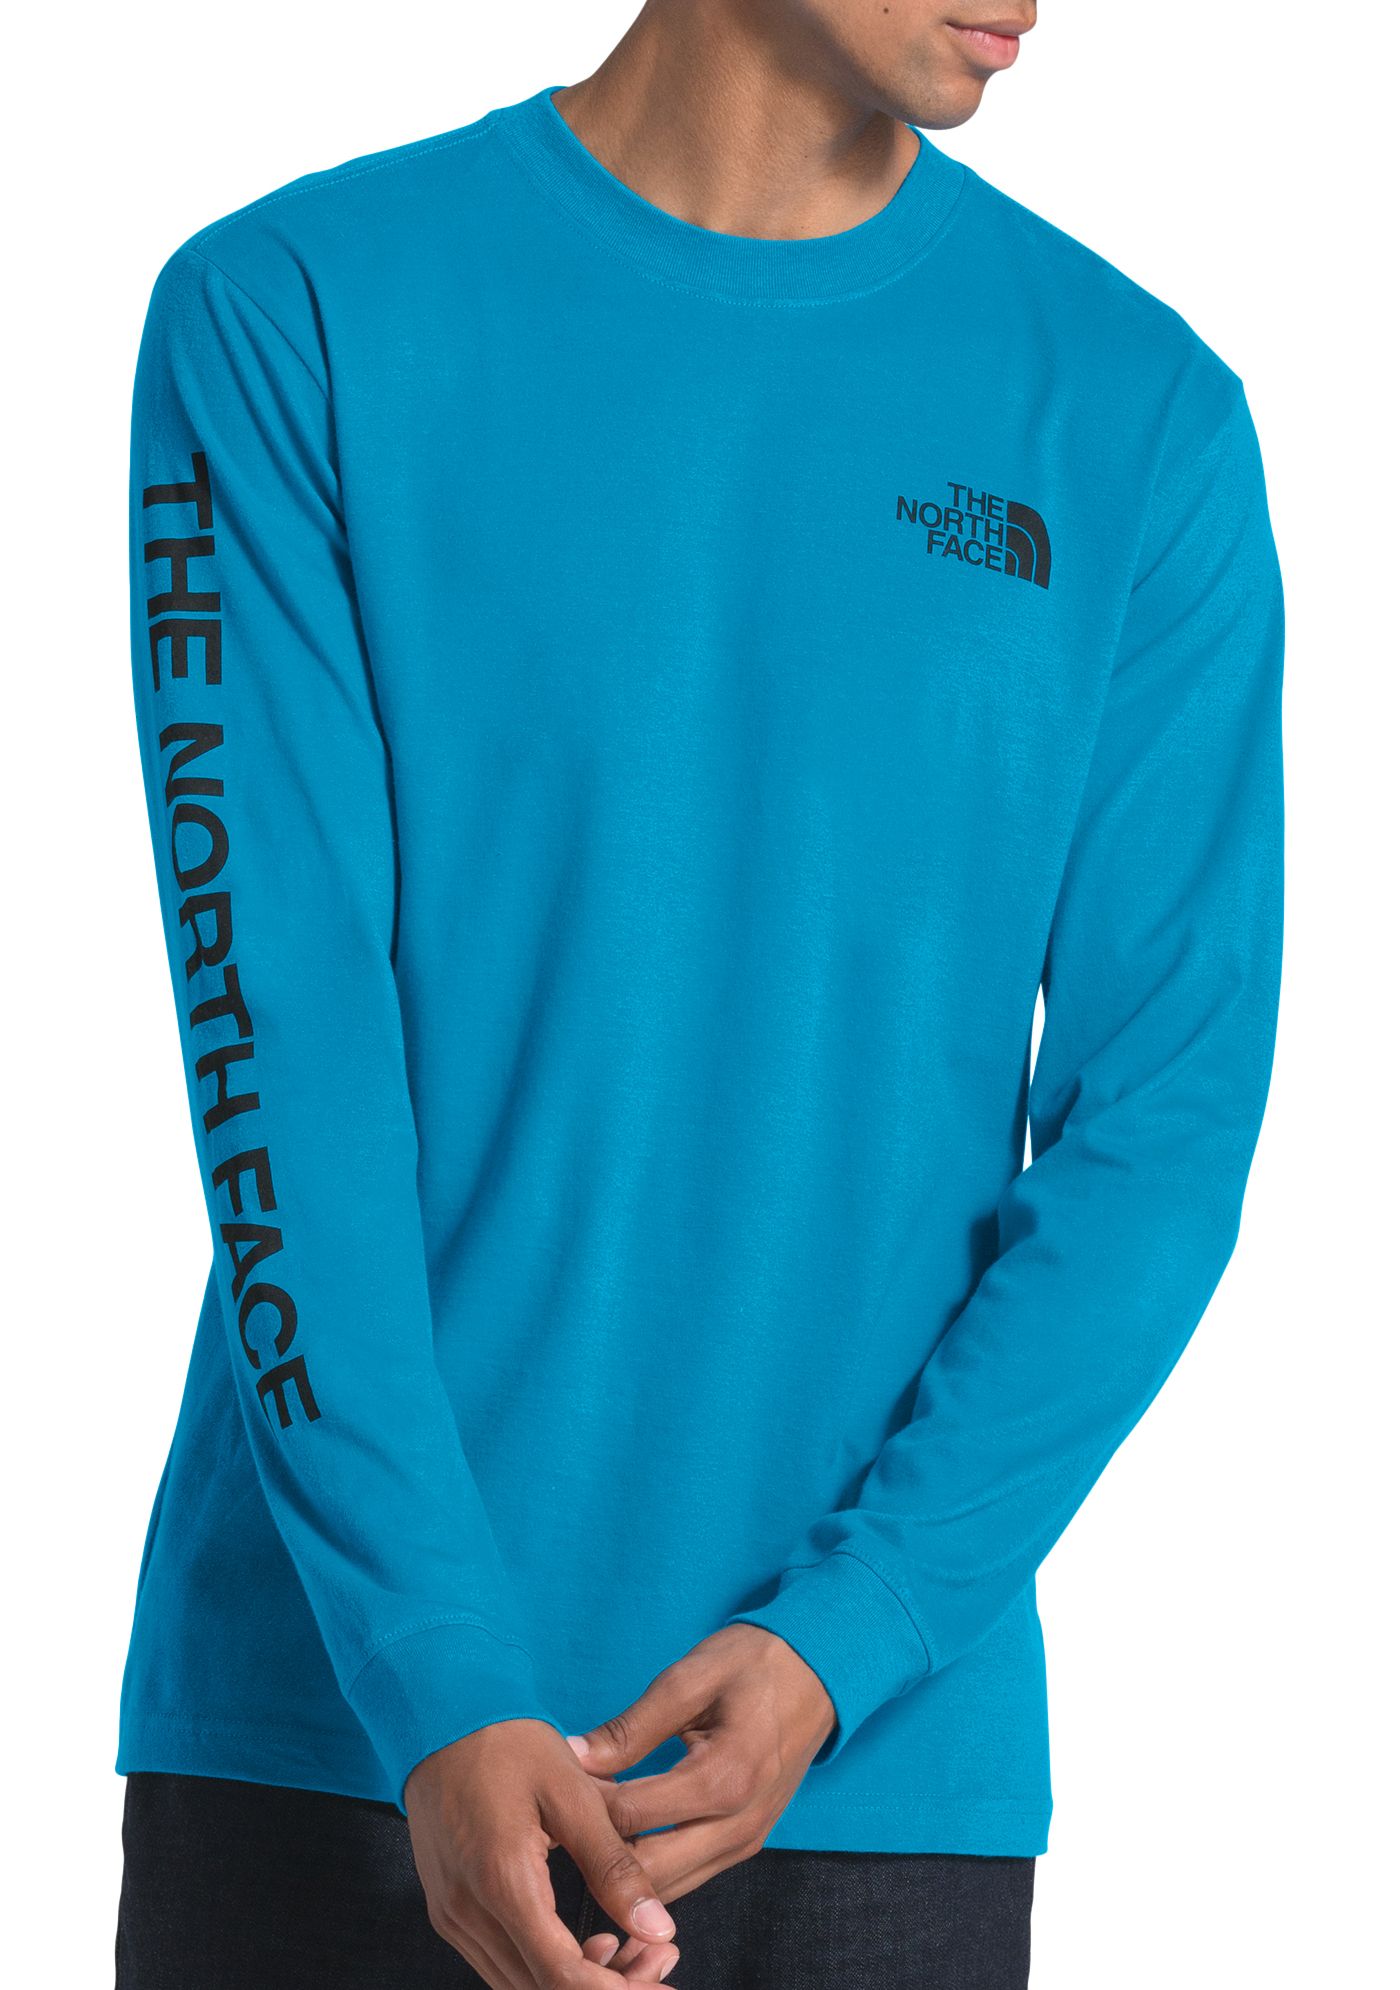 The North Face Men's Long Sleeve Brand Proud Cotton T-Shirt | DICK'S ...